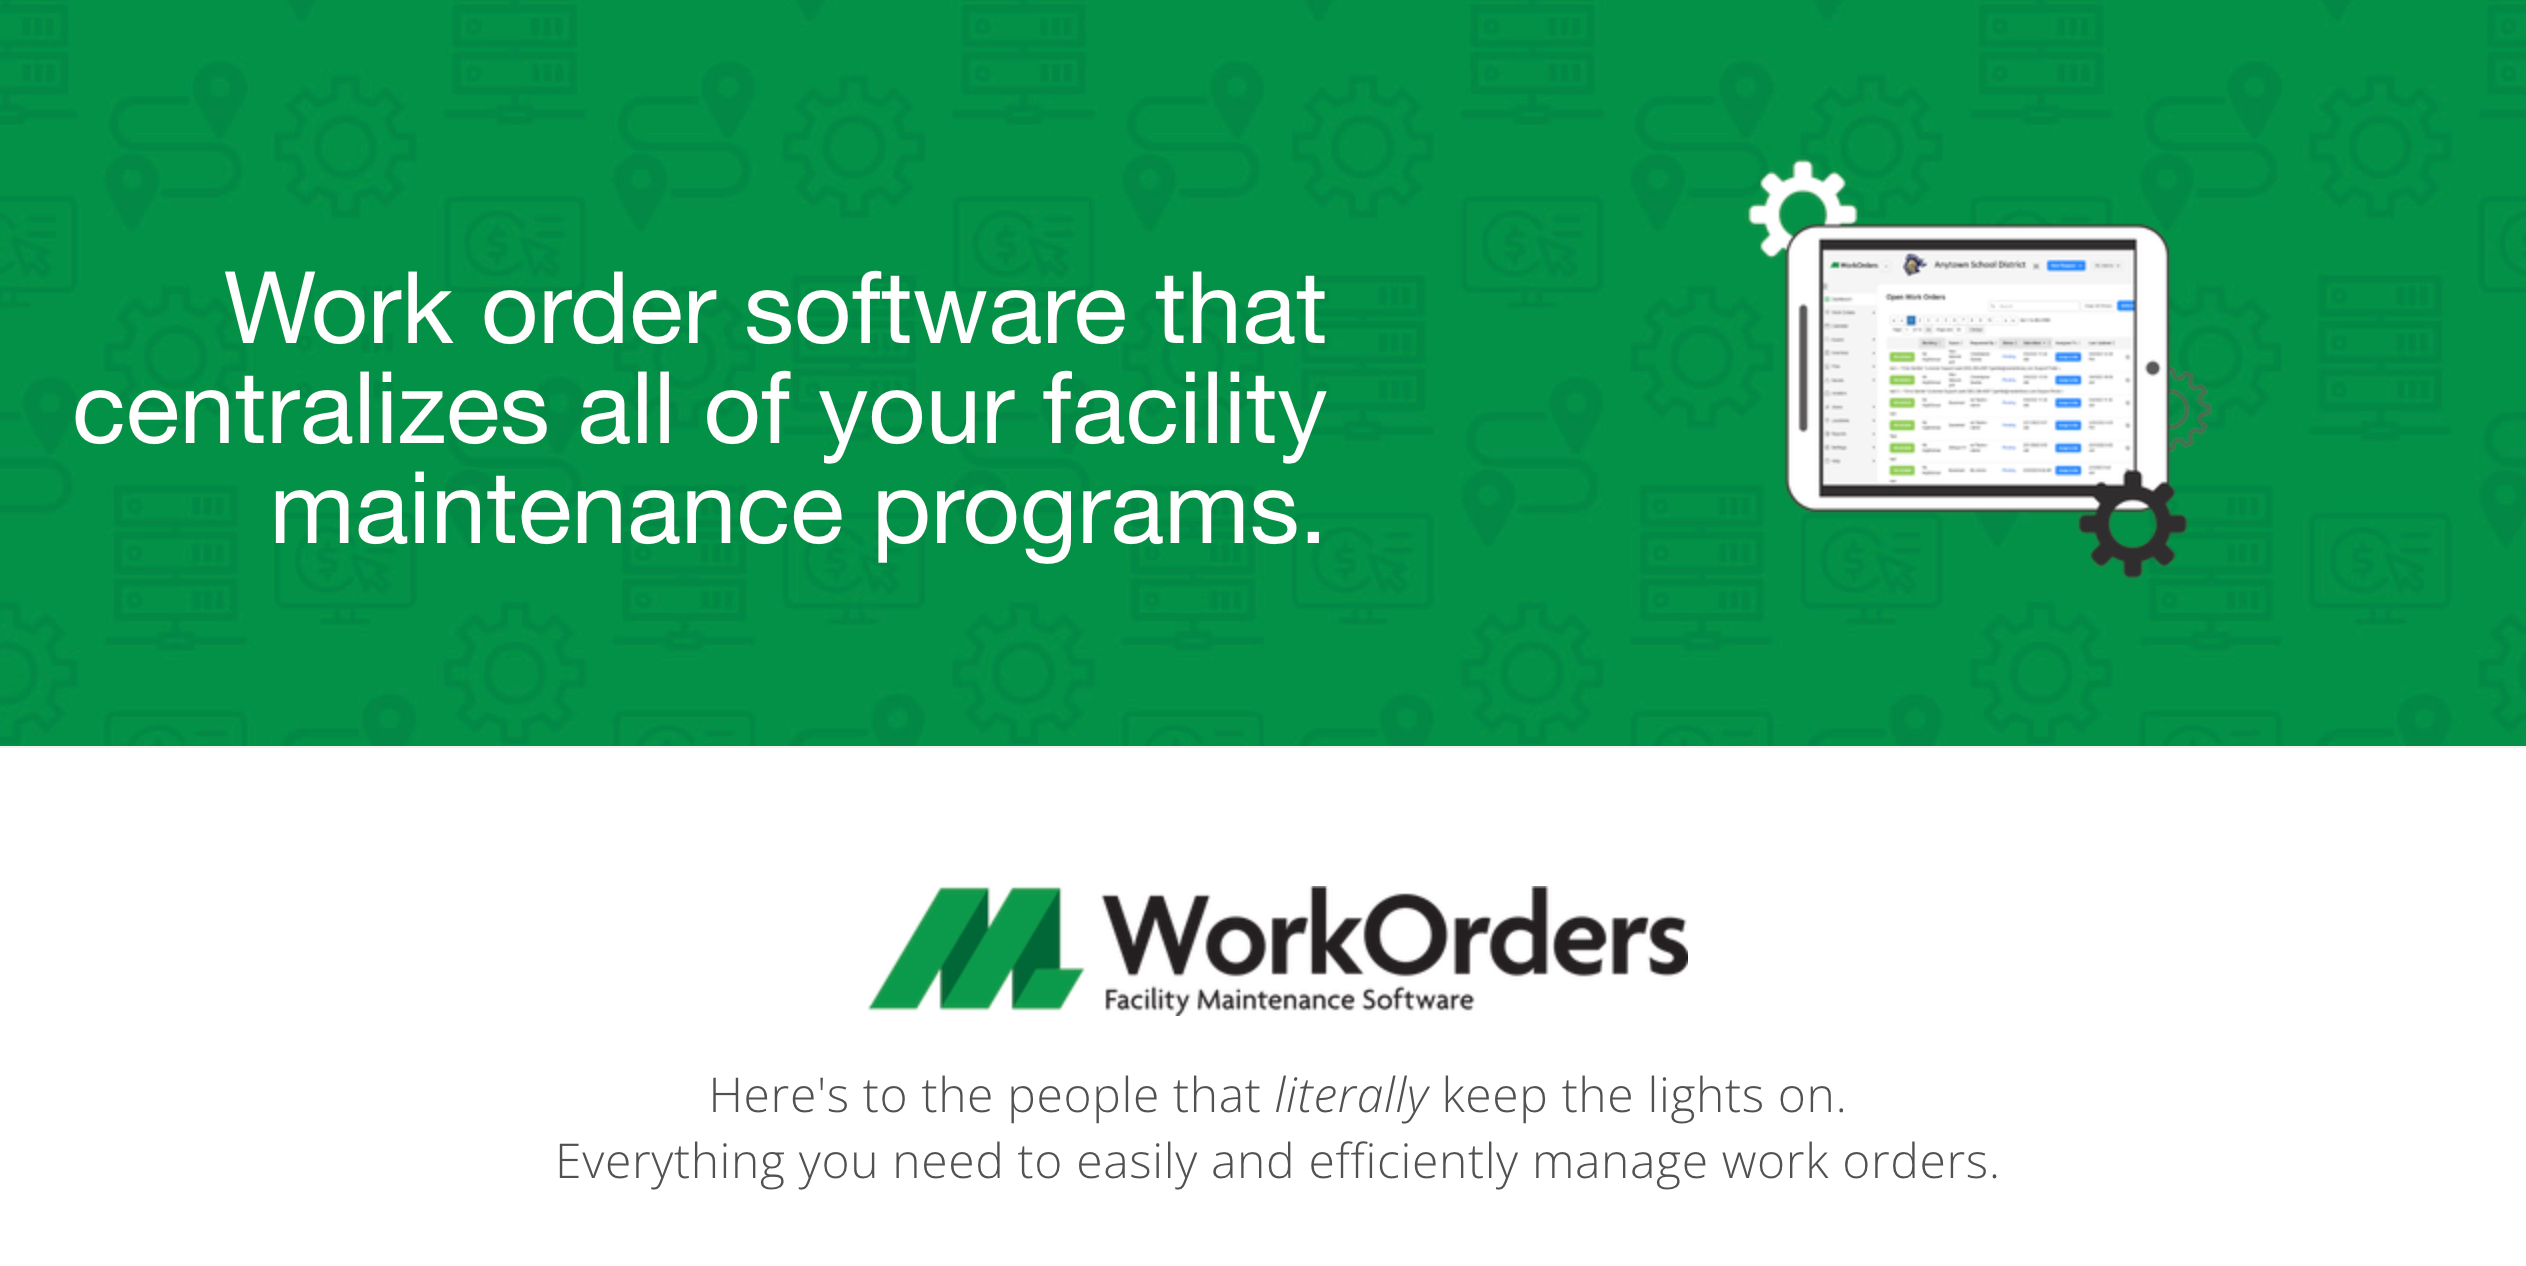 Facilities Management Software ML Work Orders